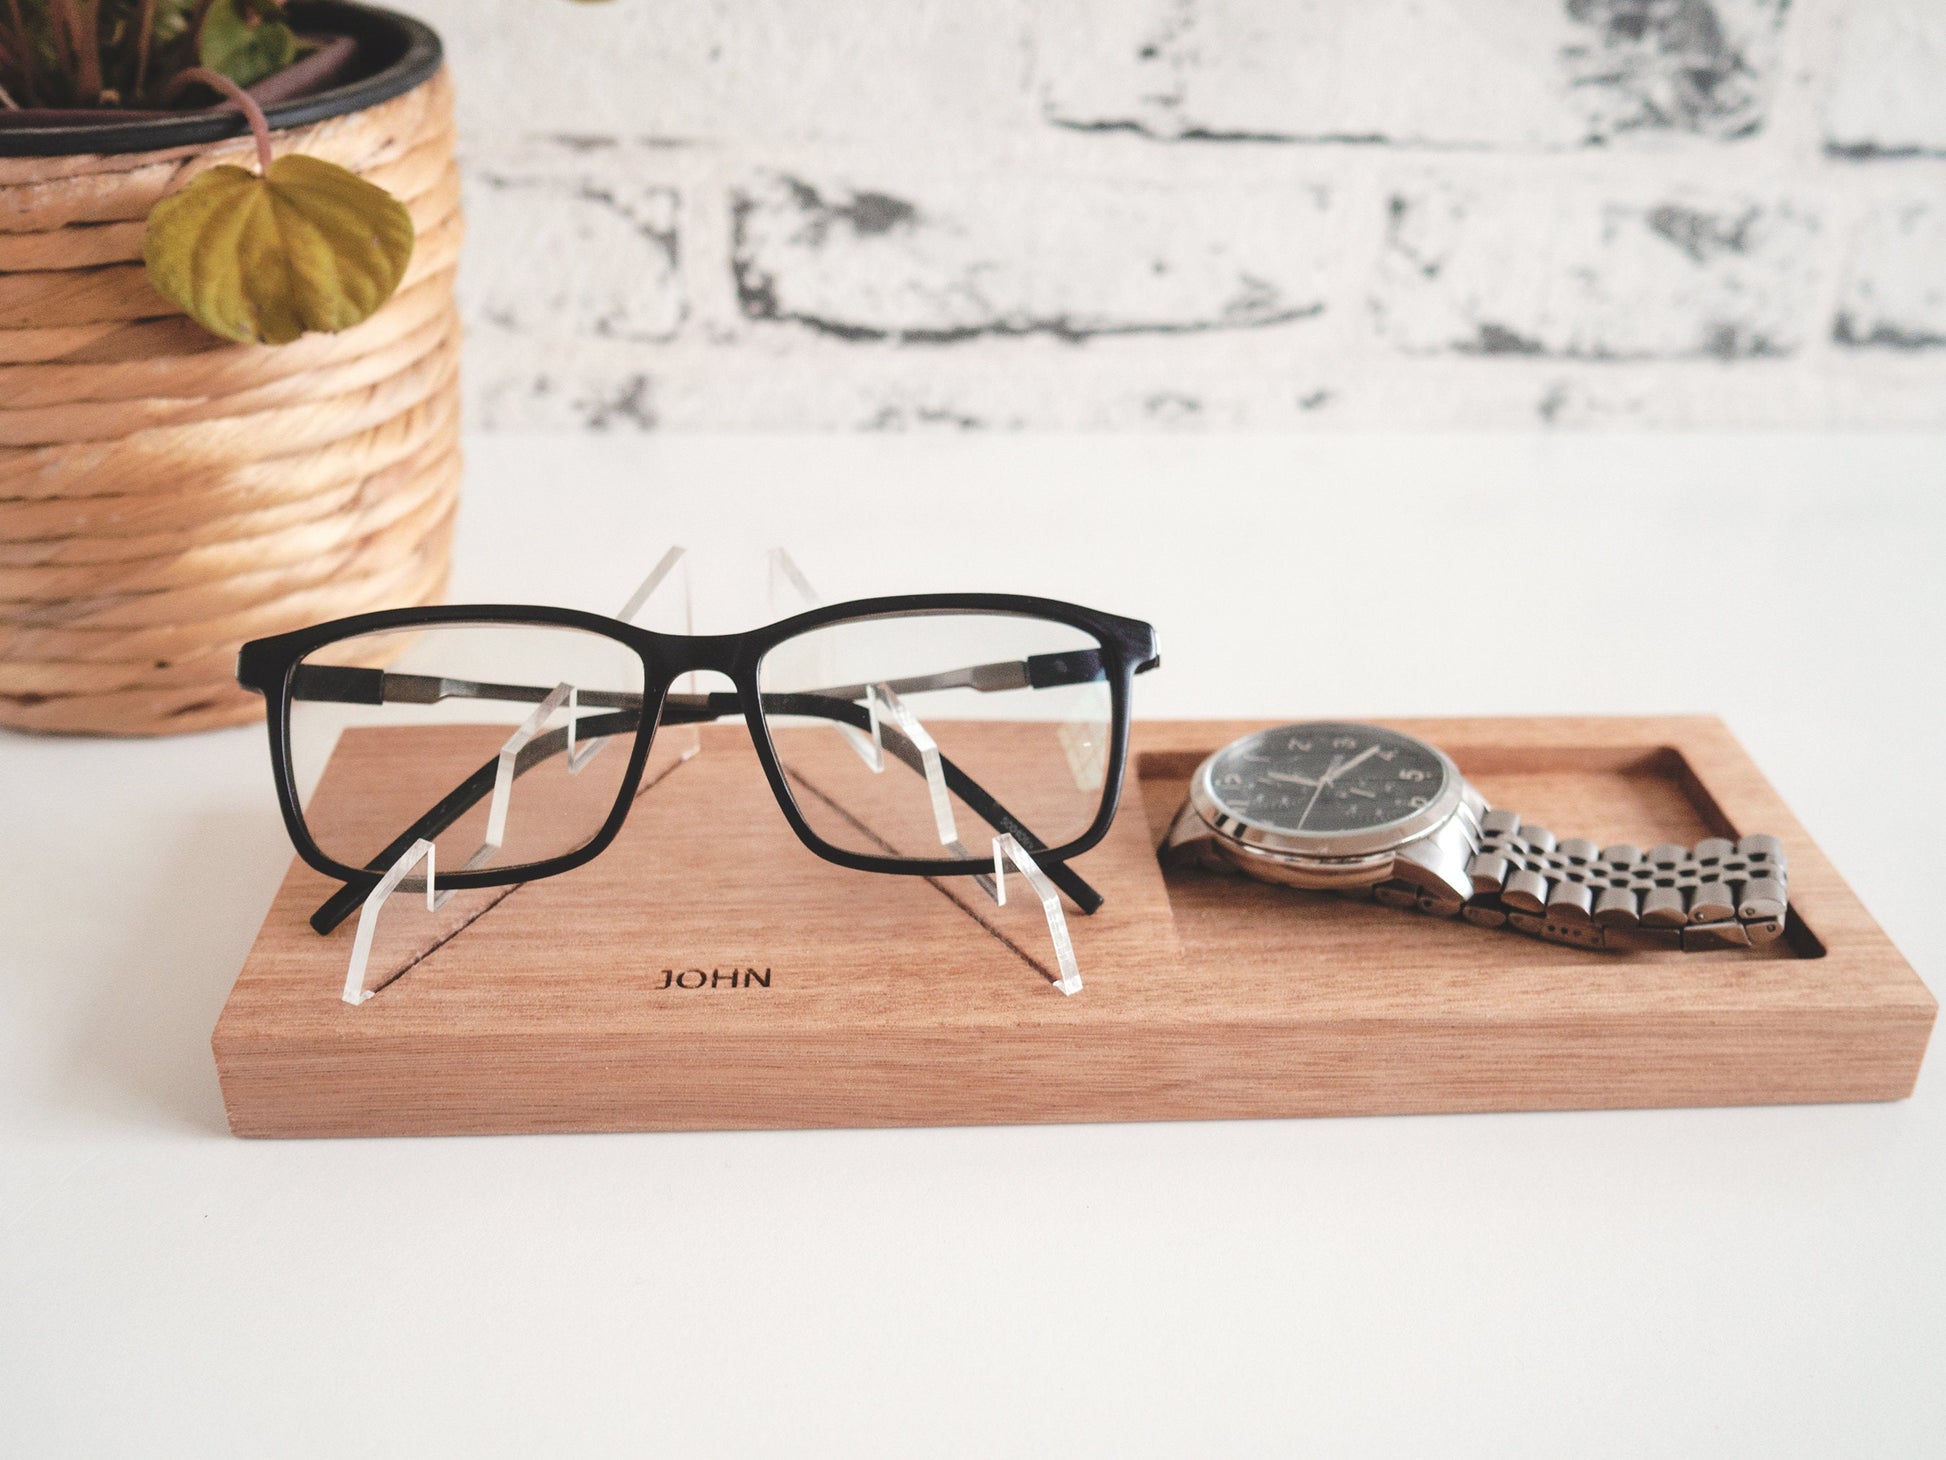 Personalised Eyeglasses Stand with dish tray - Glasses Holder, Personalised Glasses Holder Stand, Eyeglass stand, Fathers Day Gift, Dad gift